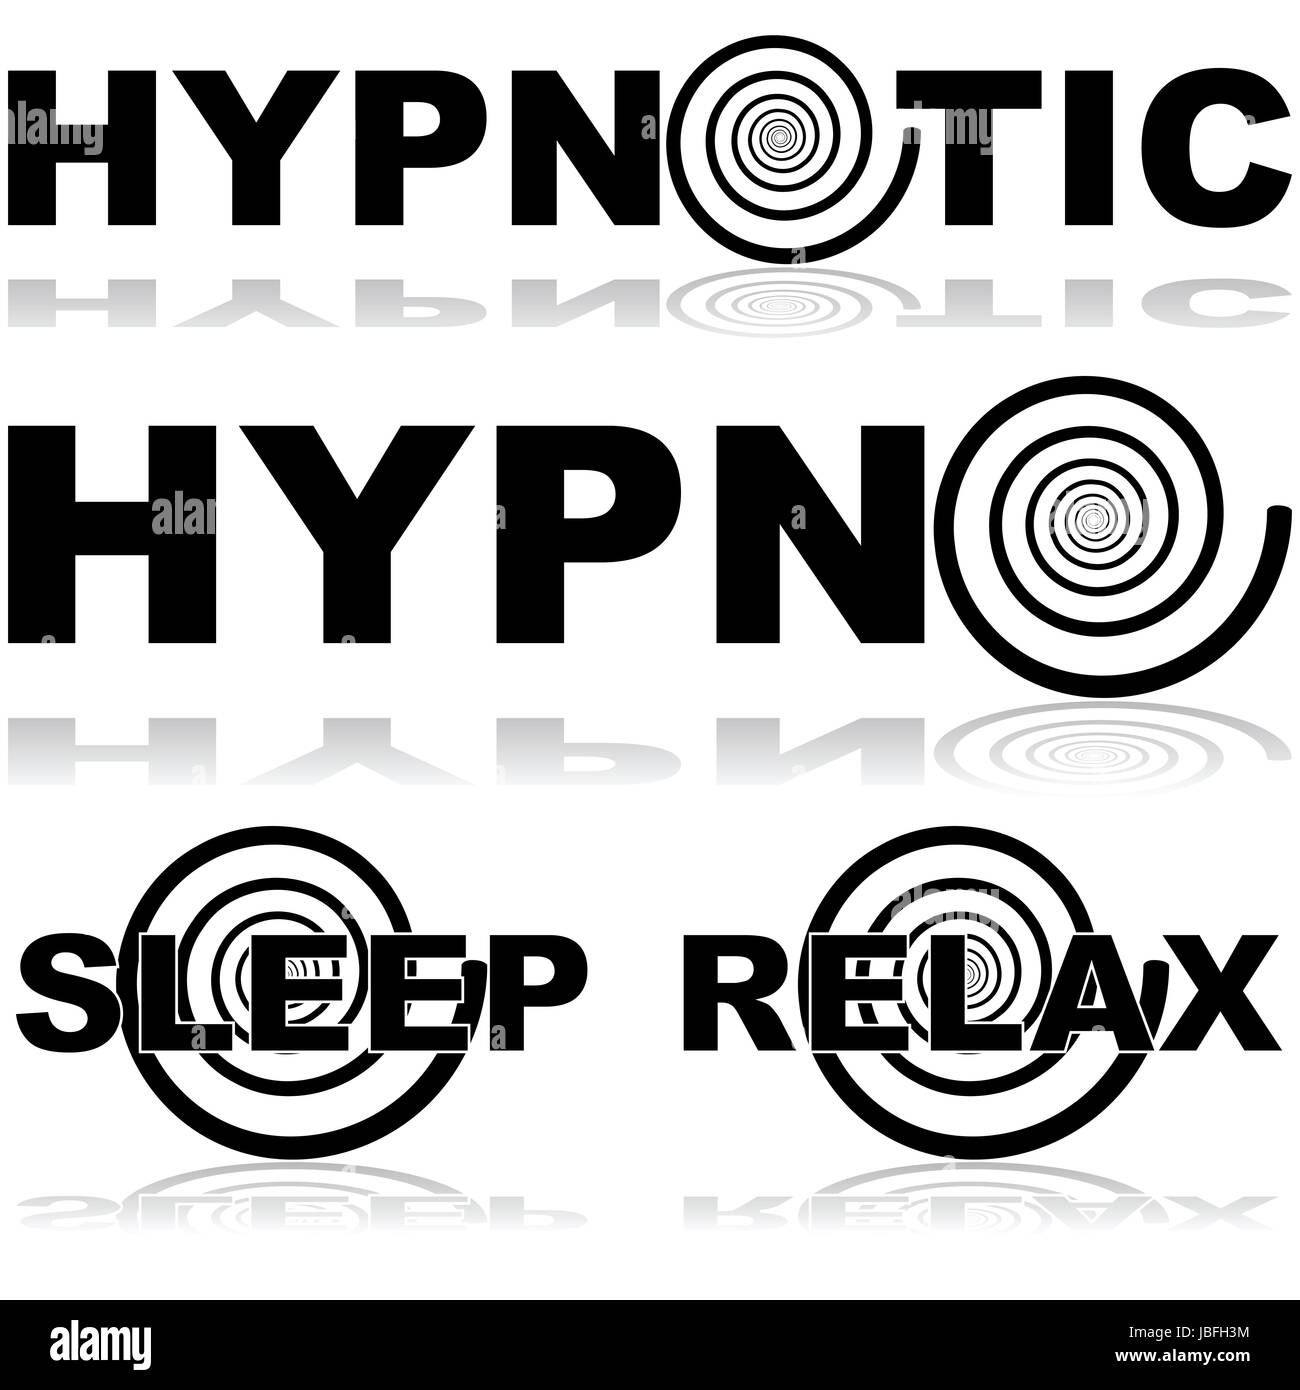 Icon set showing a hypnosis spiral in combination with certain words normally associated with this practice Stock Photo